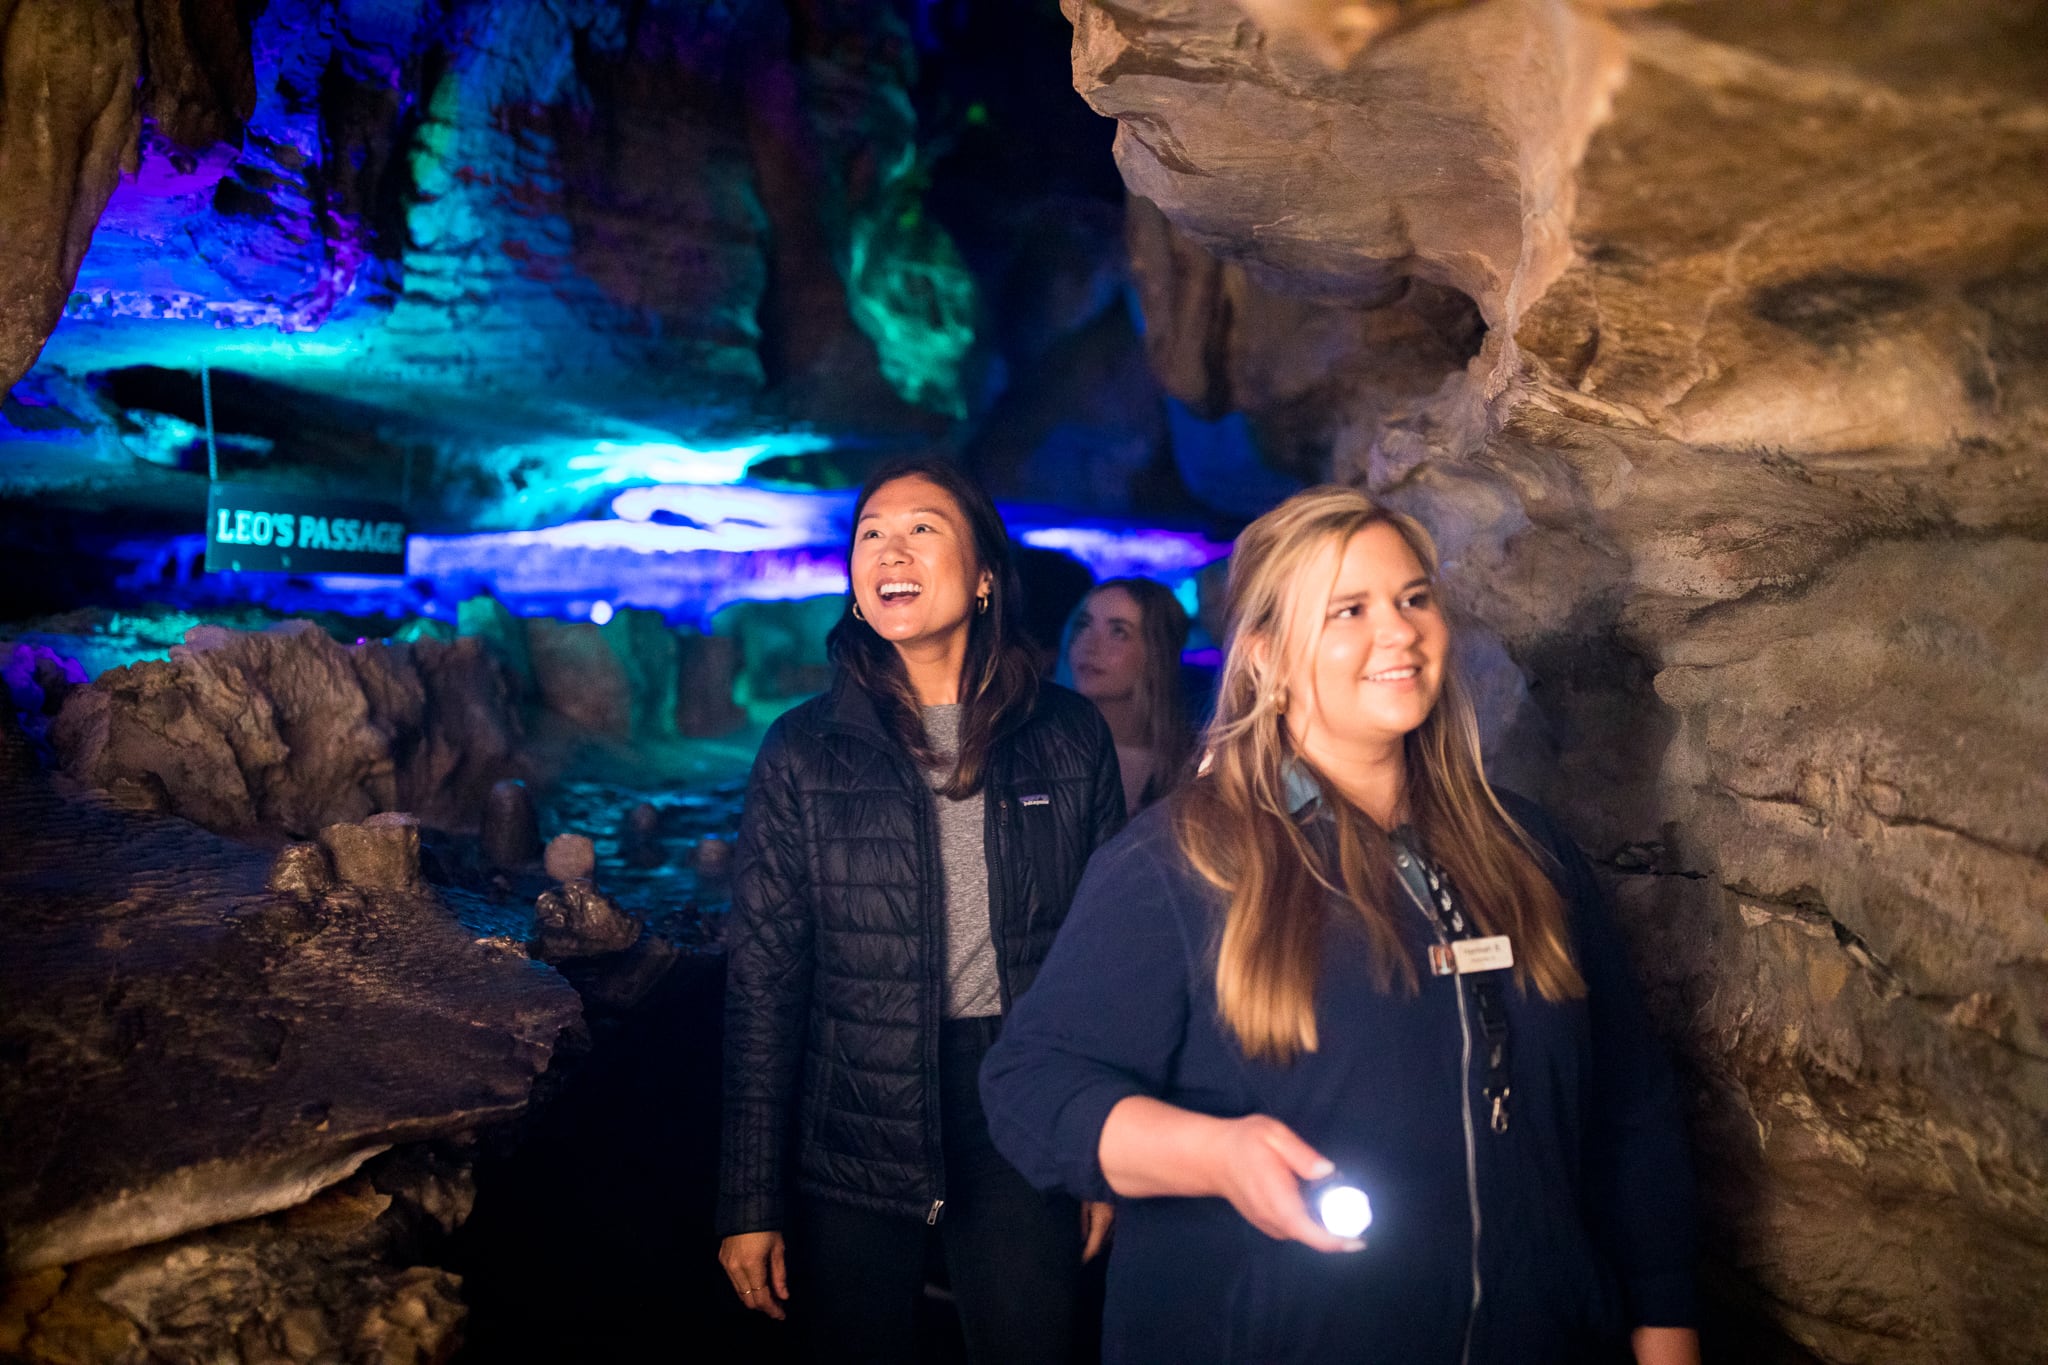 a guide with a flashlight leads a woman through a cave